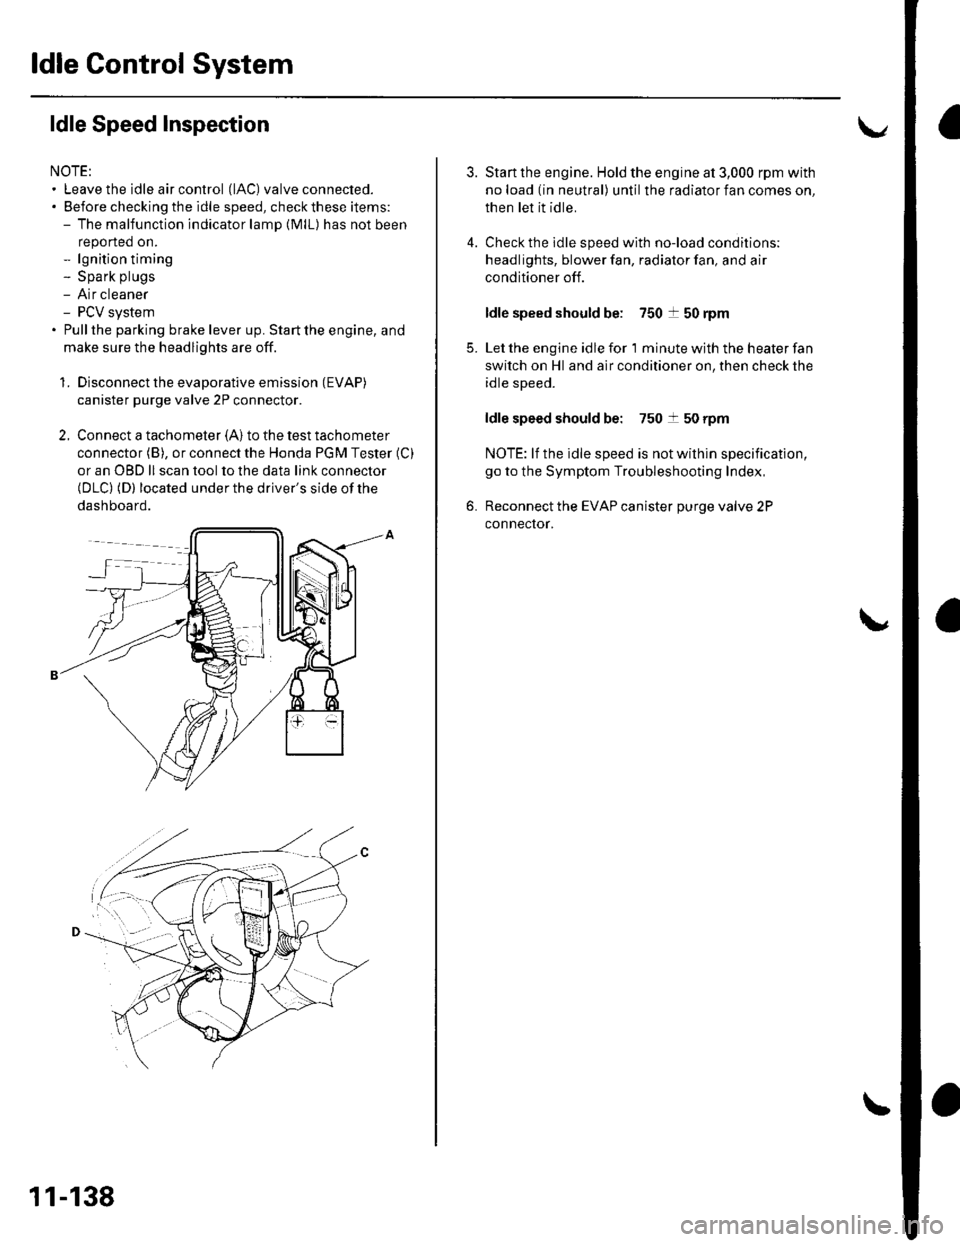 HONDA CIVIC 2002 7.G Workshop Manual ldle Control System
ldle Speed lnspection
NOTE: Leave the idle air control (lAC) valve connecled.. Before checking the idle speed, check these items:- The malfunction indicator lamp (MlL) has not bee